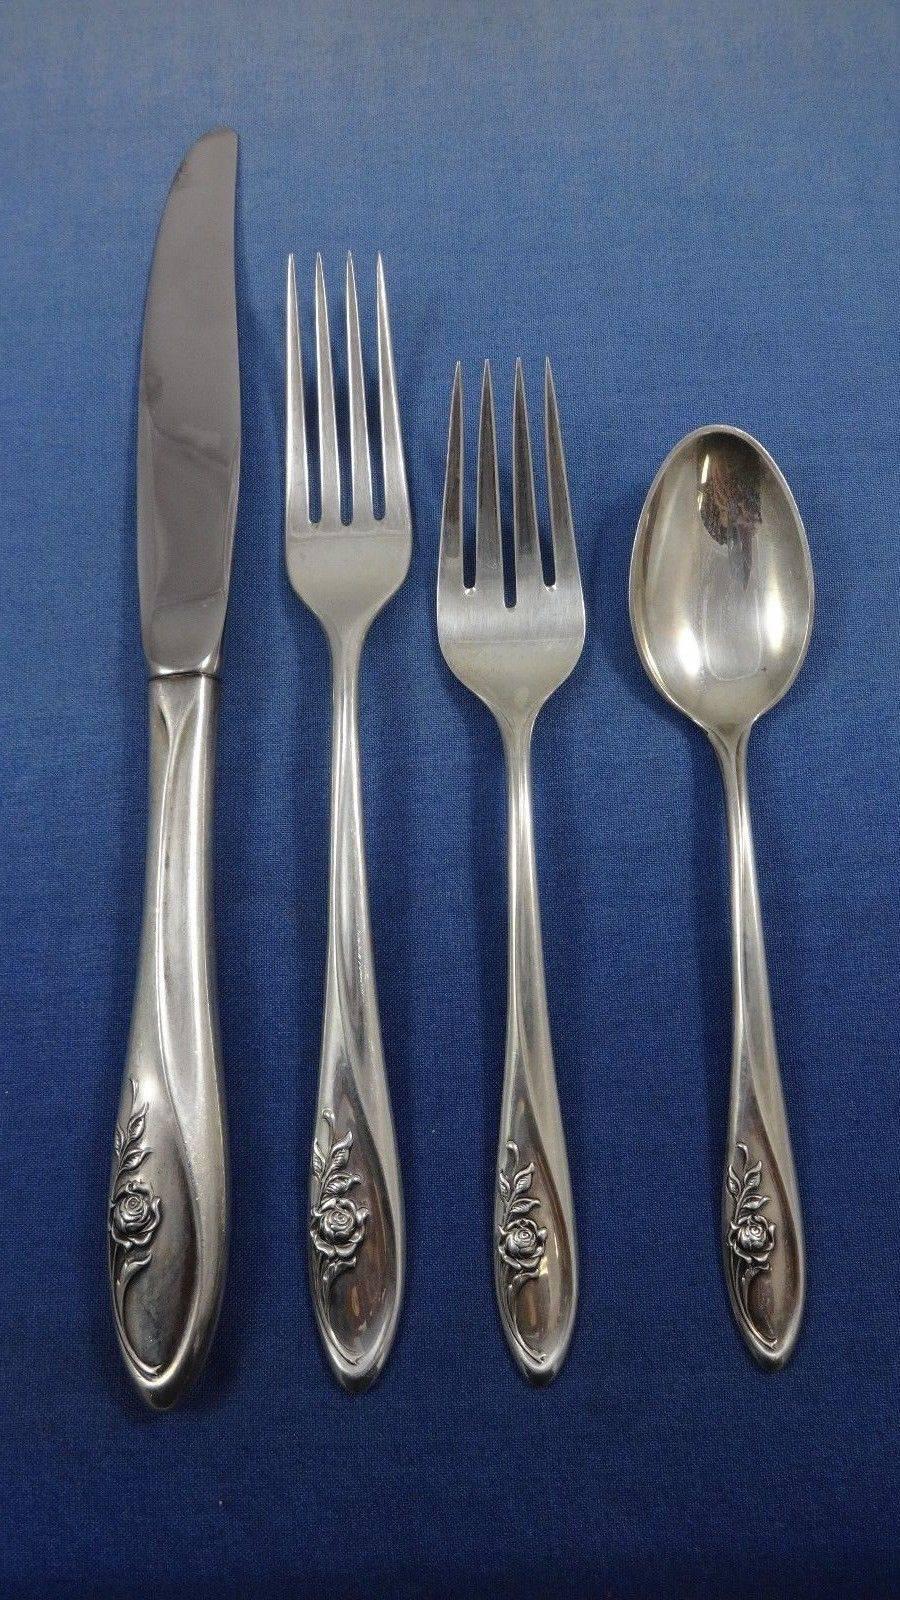 Lovely sculptured rose by Towle sterling silver flatware set of 67 pieces. This set includes:

12 knives, 9 1/8